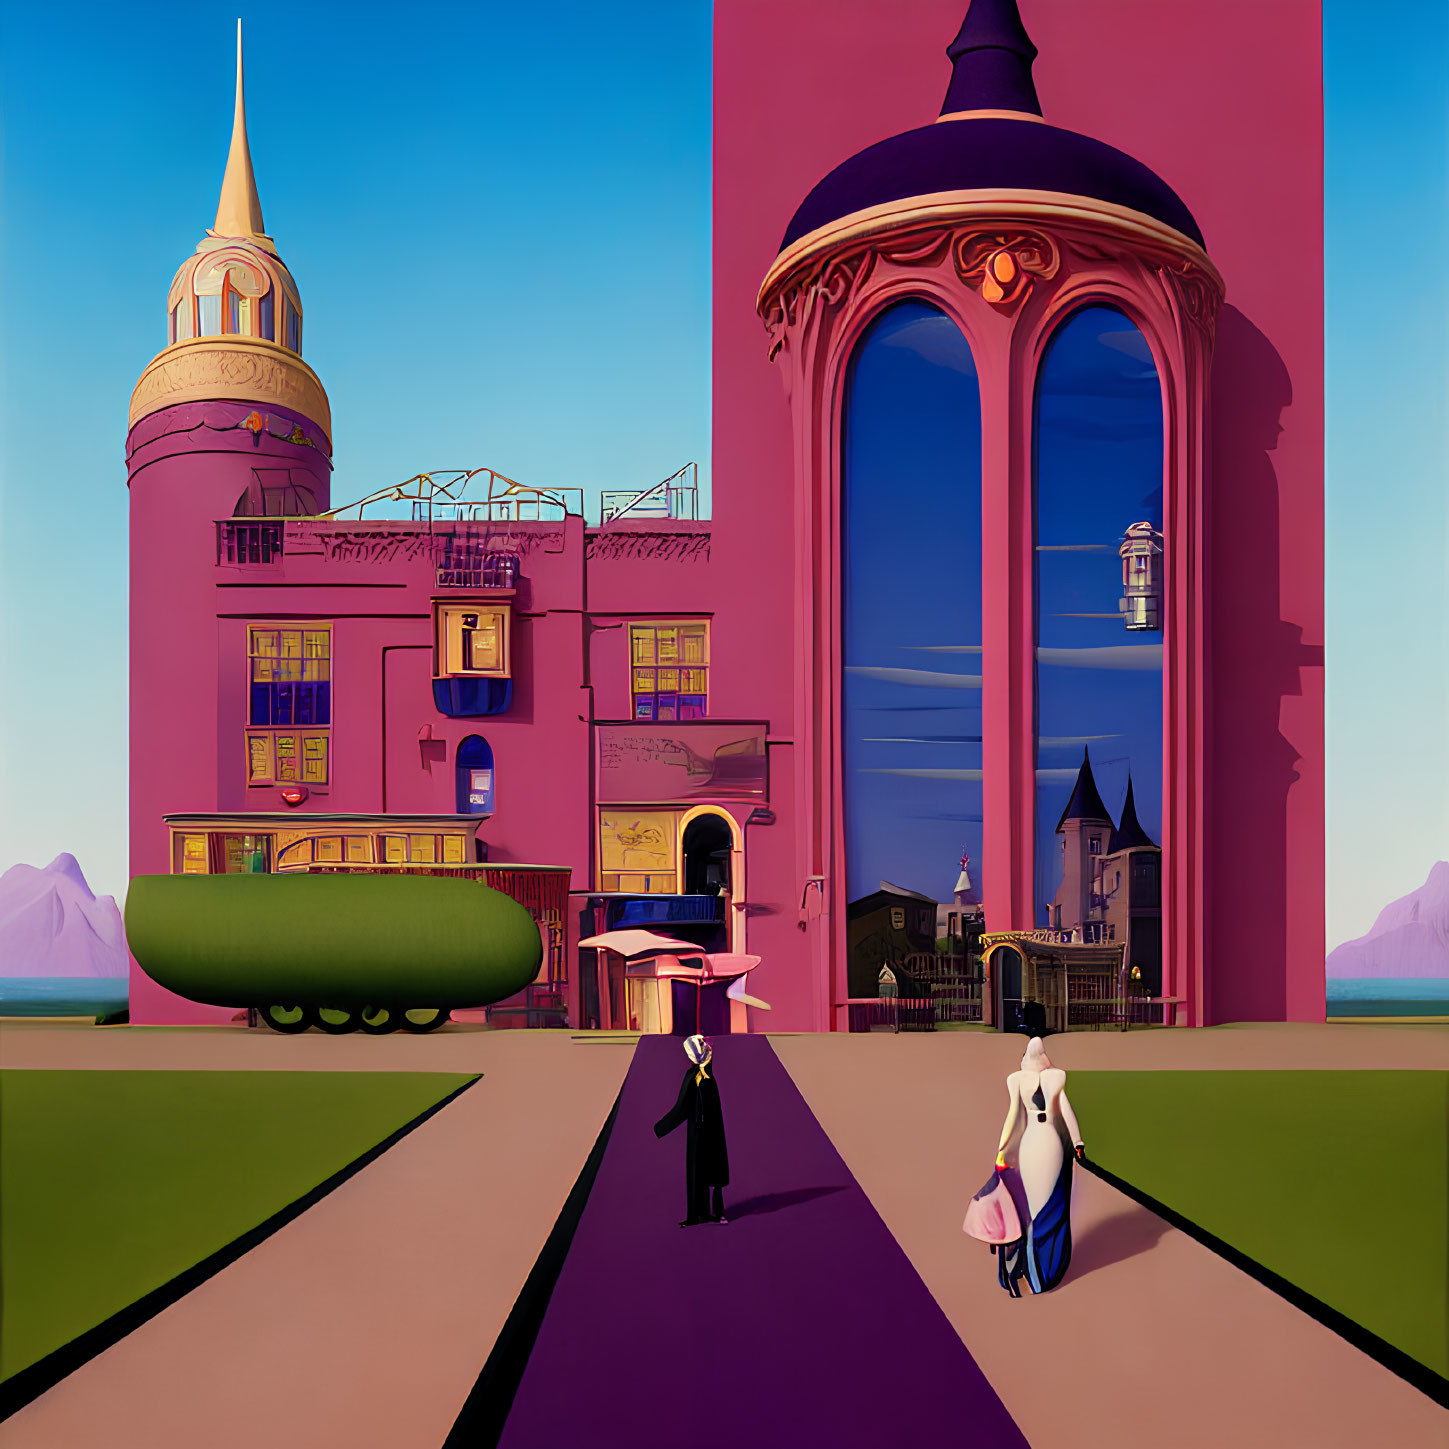 Illustration of two characters near pink building in surreal landscape